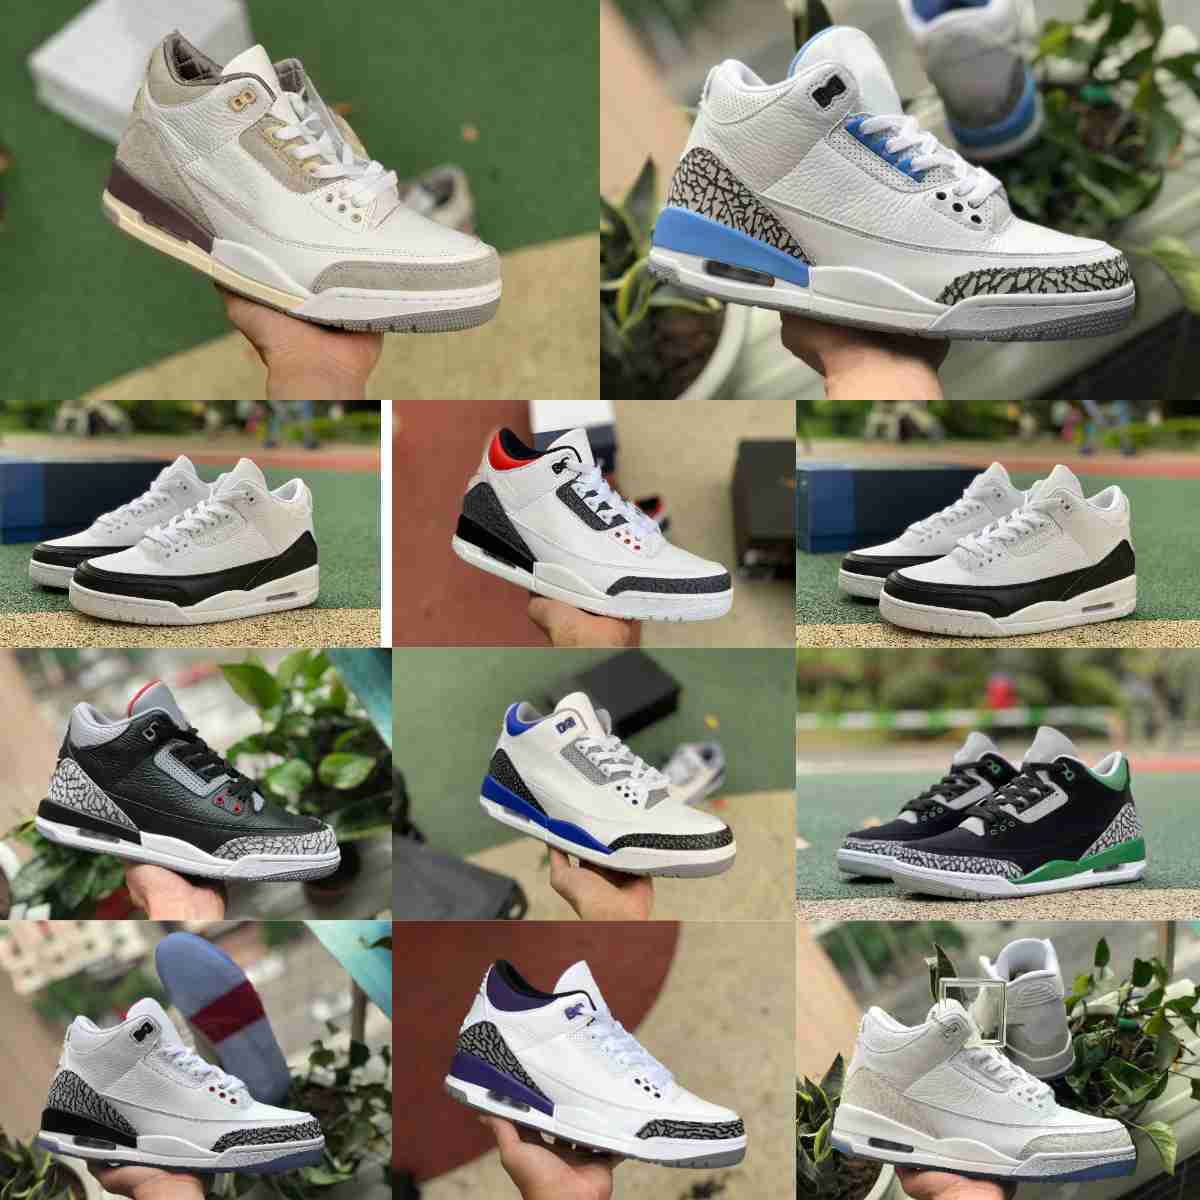 

Jumpman Dark Iirs 3 3S Basketball Shoes Mens Racer Blue Cool Grey A Ma Maniere UNC HALL OF FAME FREE THROW LINE Denim Red JTH Black Cement Pure White Trainer Sneakers S8, Please contact us